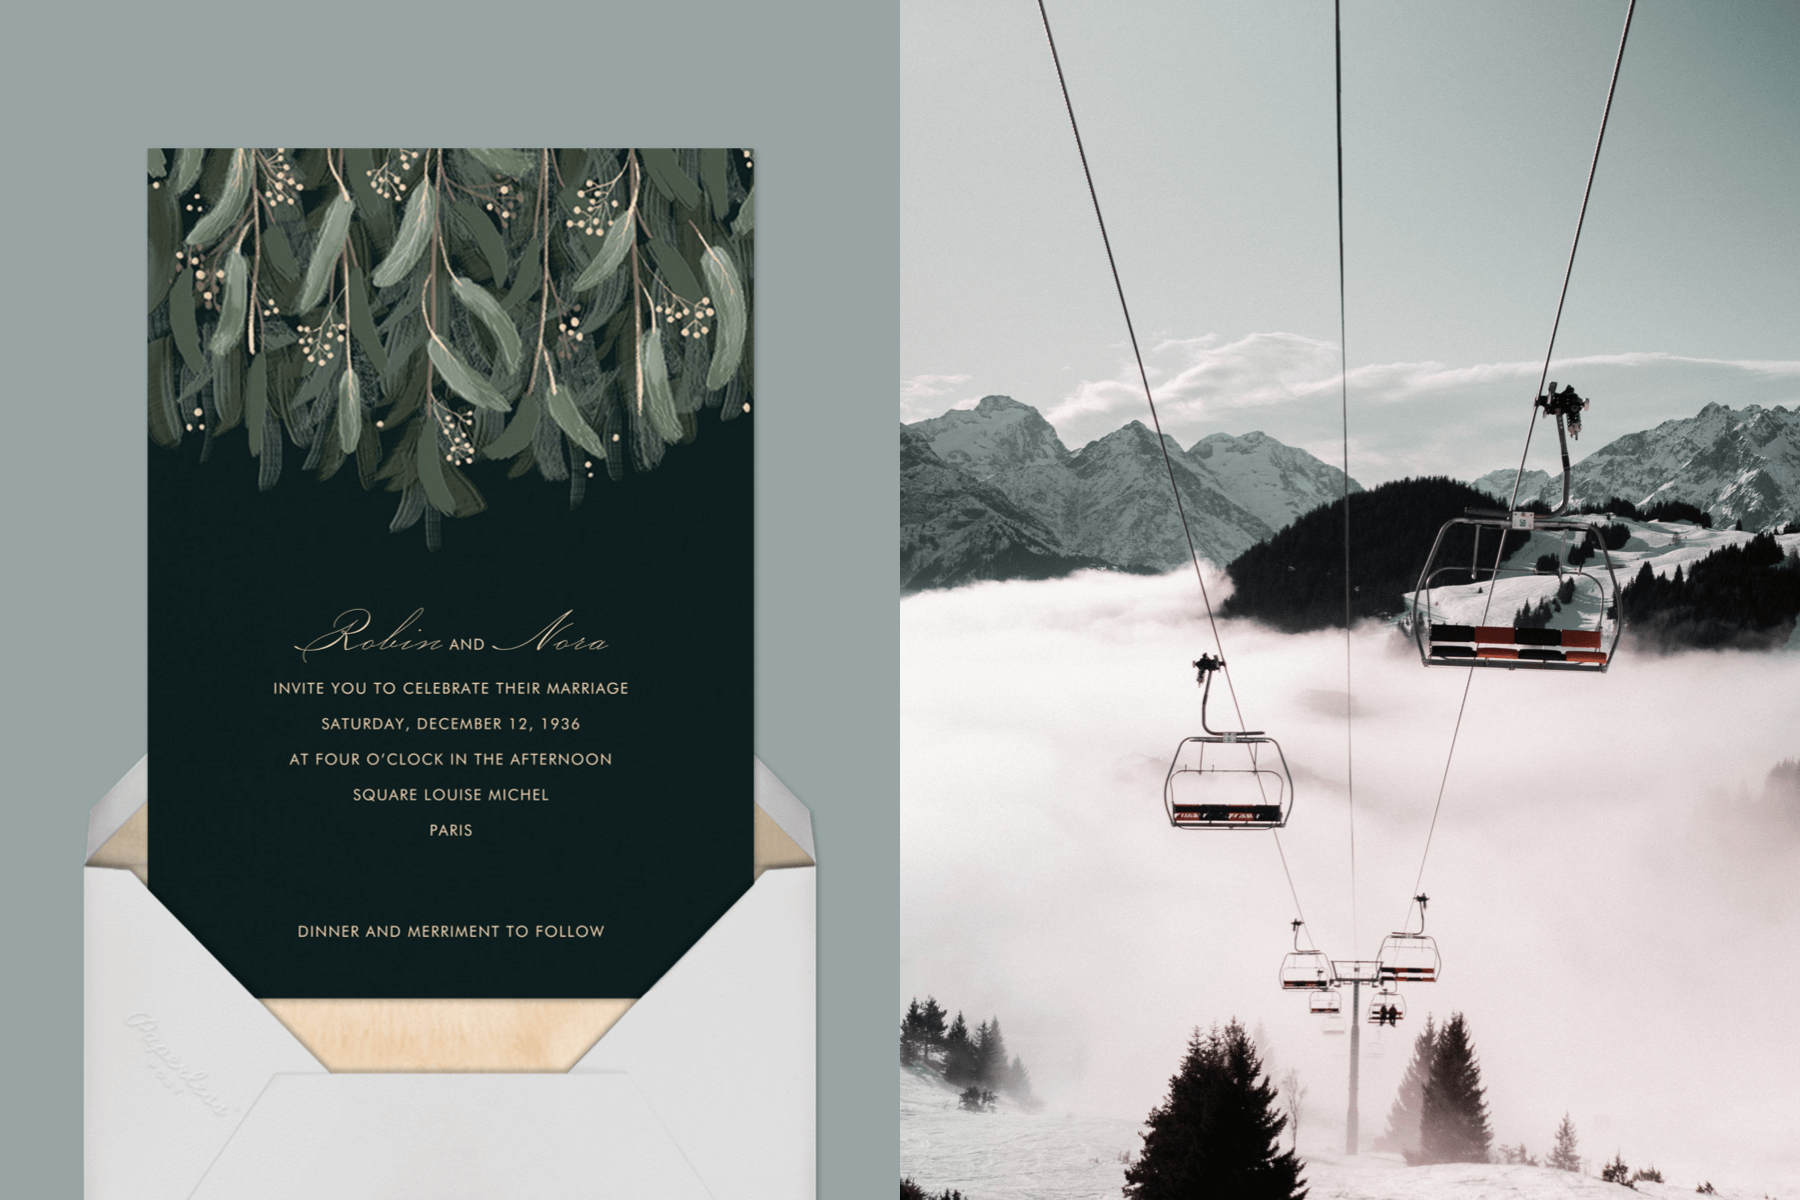 Left: A dark wedding invitation featuring eucalyptus. | Right: A ski lift surrounded by mountains and clouds.